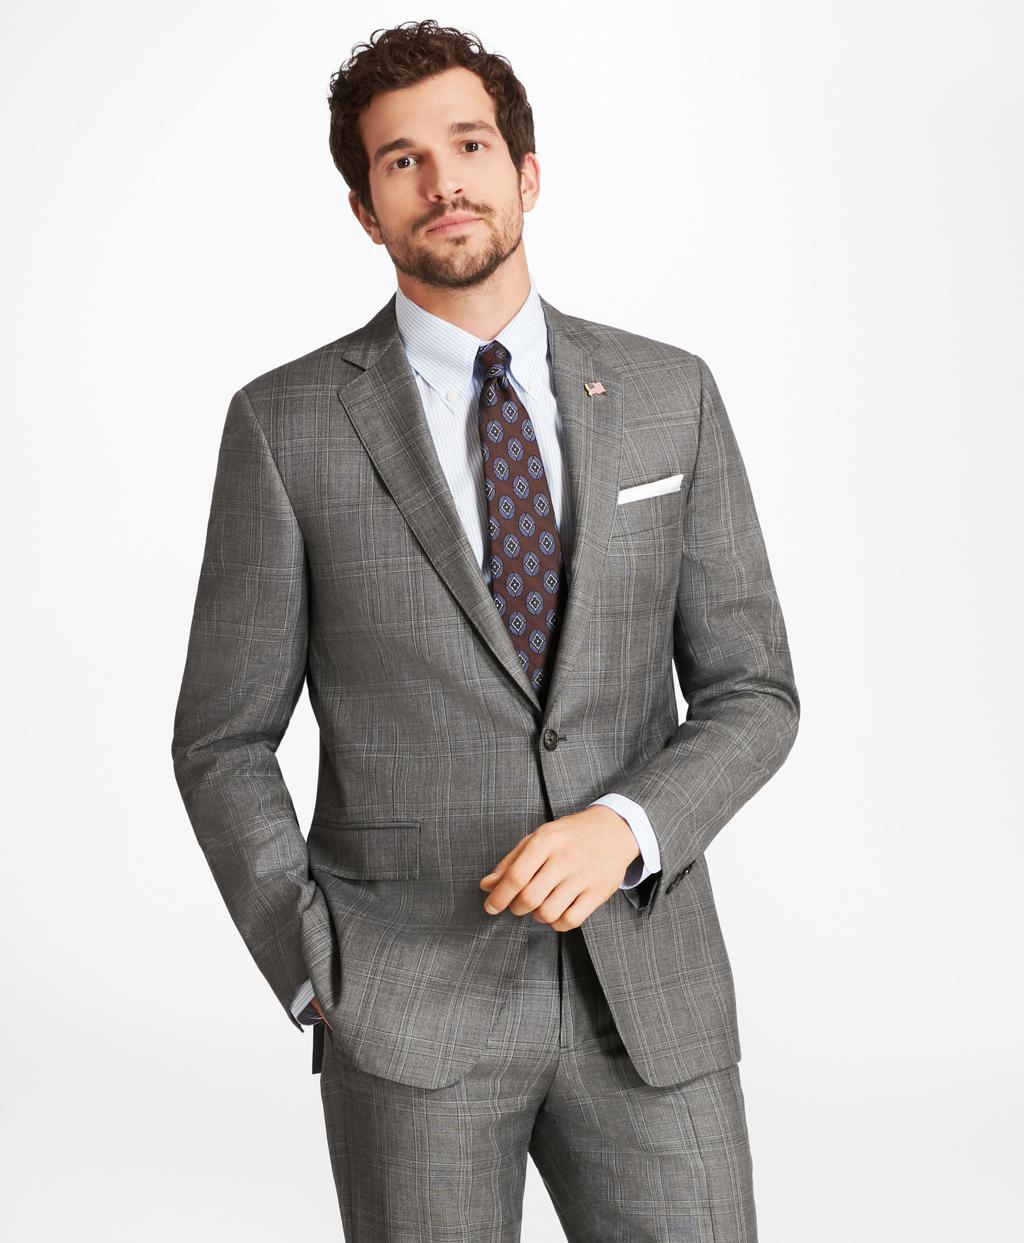 Brooks Brothers Men's Suits Fit Guide - Brooks brothers Madison Fit ...